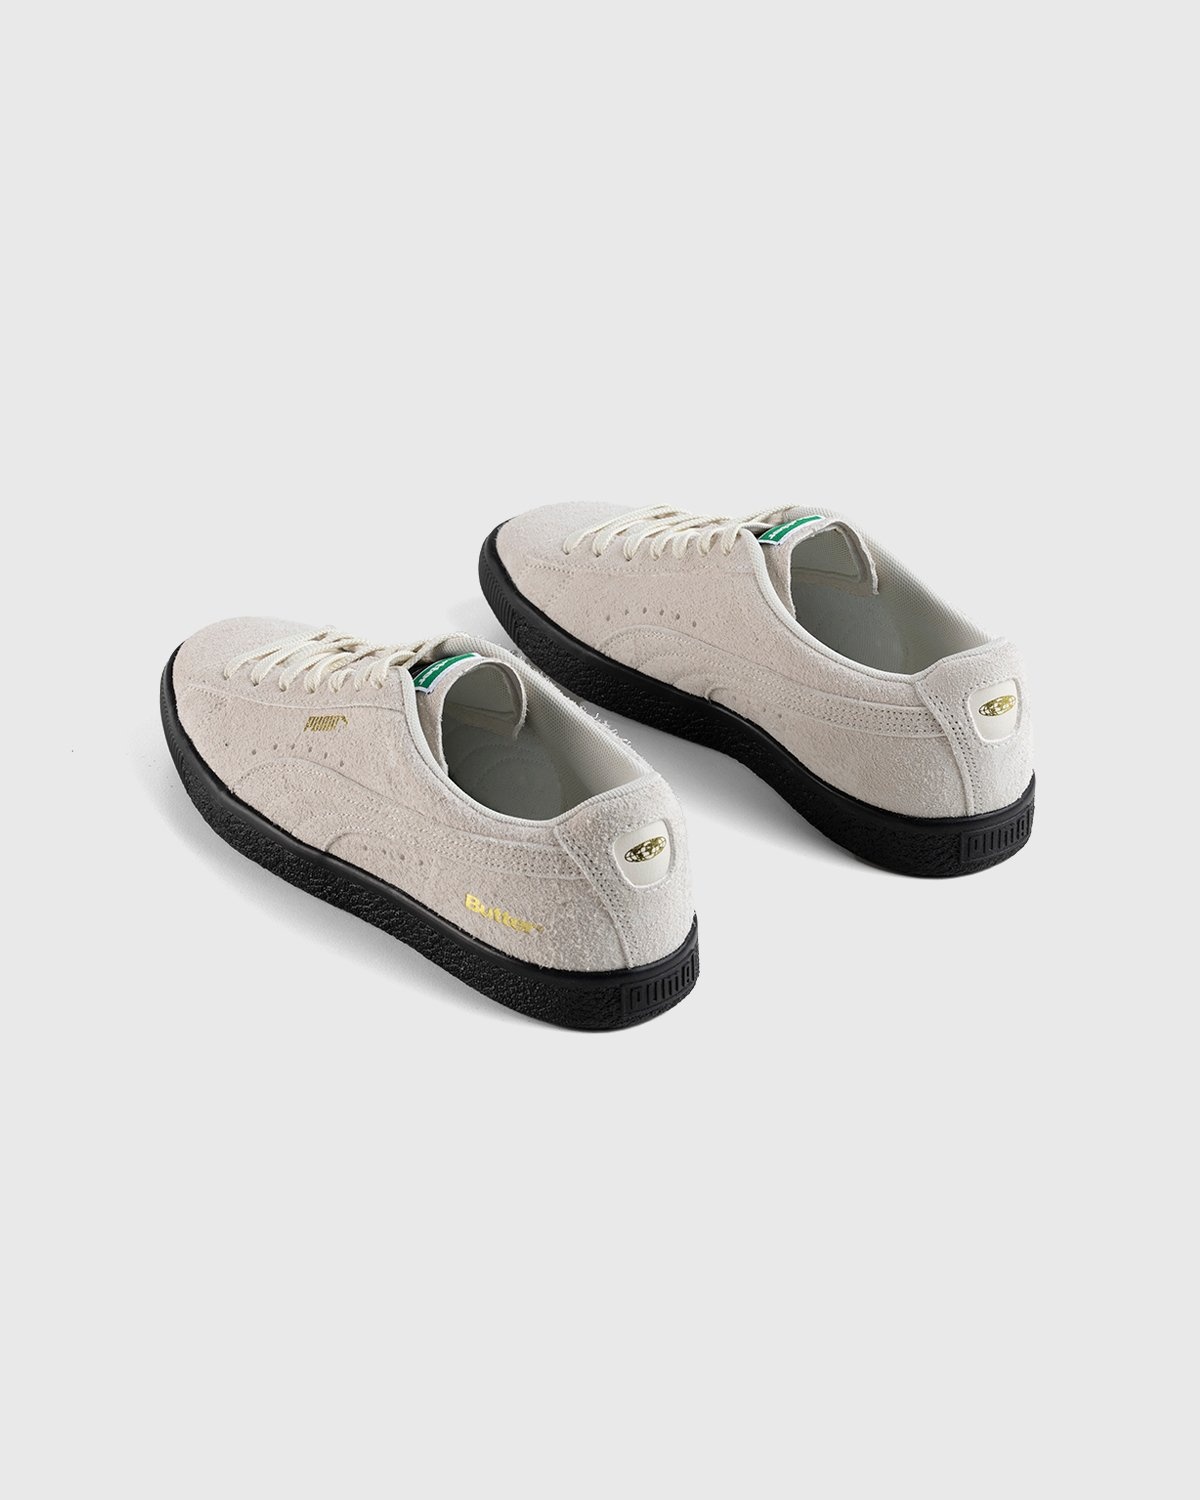 Puma x Butter Goods – Suede VTG Whisper White/Puma Black - Low Top Sneakers - Green - Image 4